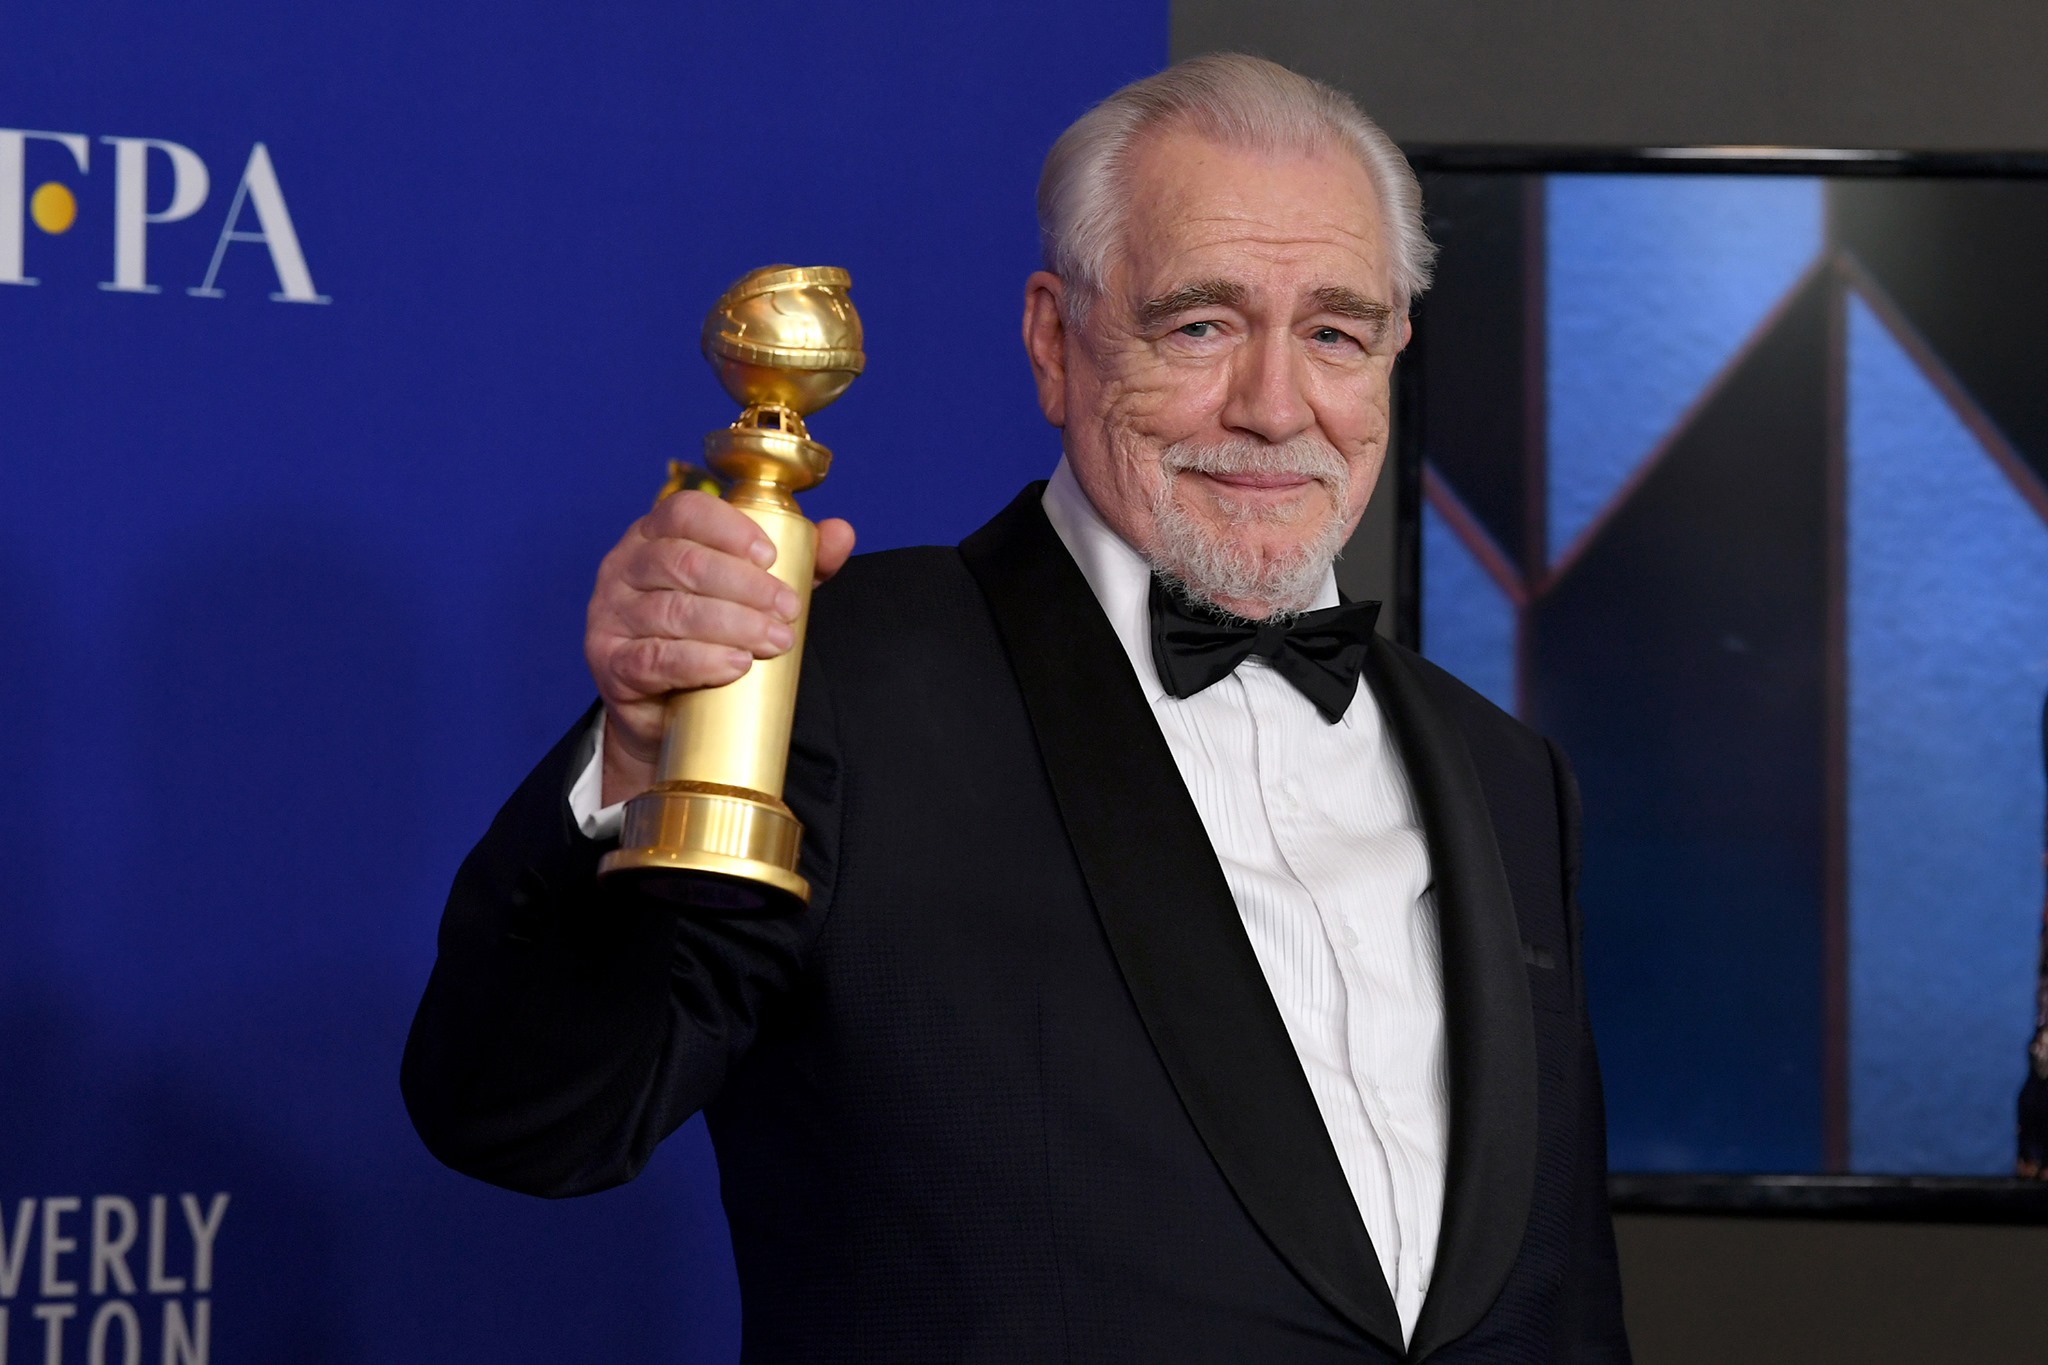 Cox won a Golden Globe earlier this year for his performance in HBO's <em>Succession.</em>”/><cite class=cite></cite></div><figcaption aria-hidden=true>Cox won a Golden Globe earlier this year for his performance in HBO’s <em>Succession.</em> <cite class=hidden></cite></figcaption></figure><p>In response to the news, Ian Rankin tweeted: “This is a one-off five-minute ‘playlet’ showing how Rebus is coping (or not) with the lockdown.</p><p>“Still buzzing that Brian Cox agreed to do it” he added.</p><p>Scenes for Survival is a season of digital theatre from the National Theatre of Scotland which will launch new pieces of work from creative talents across a series of online platforms and channels over the next few months.</p><p>Cora Bissett, Mark Bonnar, Tam Dean Burn and Alan Cumming are also taking part in the initiative – with all proceeds going to a hardship fund that has been set-up for artists and theatre industry workers who have been hardest hit financially by the current crisis. </p><p>“Theatre has been very affected by this pandemic”, said Cox.</p><p>“But I love how quickly they have adapted to putting things online. A play that was recently streamed by the Public Theater [a New York City arts organisation] had 35,000 viewers, which is just phenomenal”.</p><p>The Dundee-born star is currently self-isolating outside New York. Living with Diabetes, he is particularly vulnerable to the virus.</p><p>“I am worried.</p><p>“I have got a problem with my knee and I need to have it seen to. It needs an operation, but I’m a bit worried about going into hospital.</p><p>“I haven’t been out in so long. In fact, I can’t remember the last time I went out! All the days seem to be merging into one.</p><p>“My wife has been incredible though. I’m here with my two boys. She has been doing all the shopping and disinfecting everything that comes into the house.”</p><p>Cox started his career in theatre, joining the Dundee Rep when he was just 14.  With a career spanning decades he was the first actor to play Hannibal Lecter on screen and most recently won a Golden Globe for his performance of Logan Roy in hit HBO series <em>Succession.</em></p><p>The adaptation of Rebus will stream on the National Theatre of Scotland website this May.</p><div class=